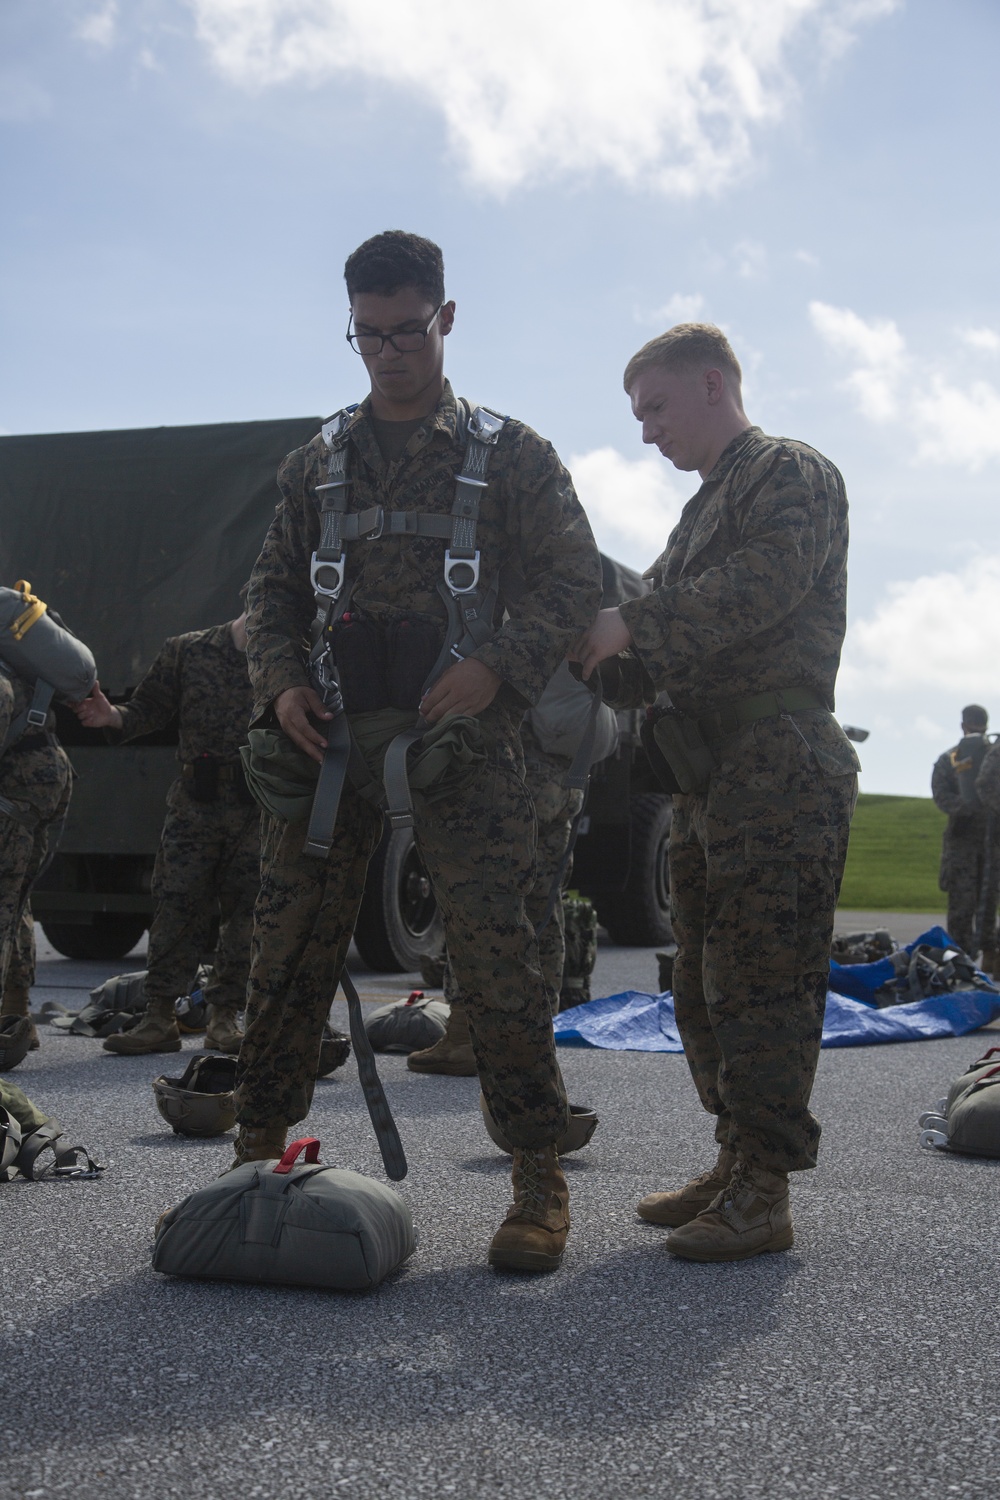 3rd Reconnaissance Battalion and 3rd Transportation Support Battalion Conduct Parachute Operations